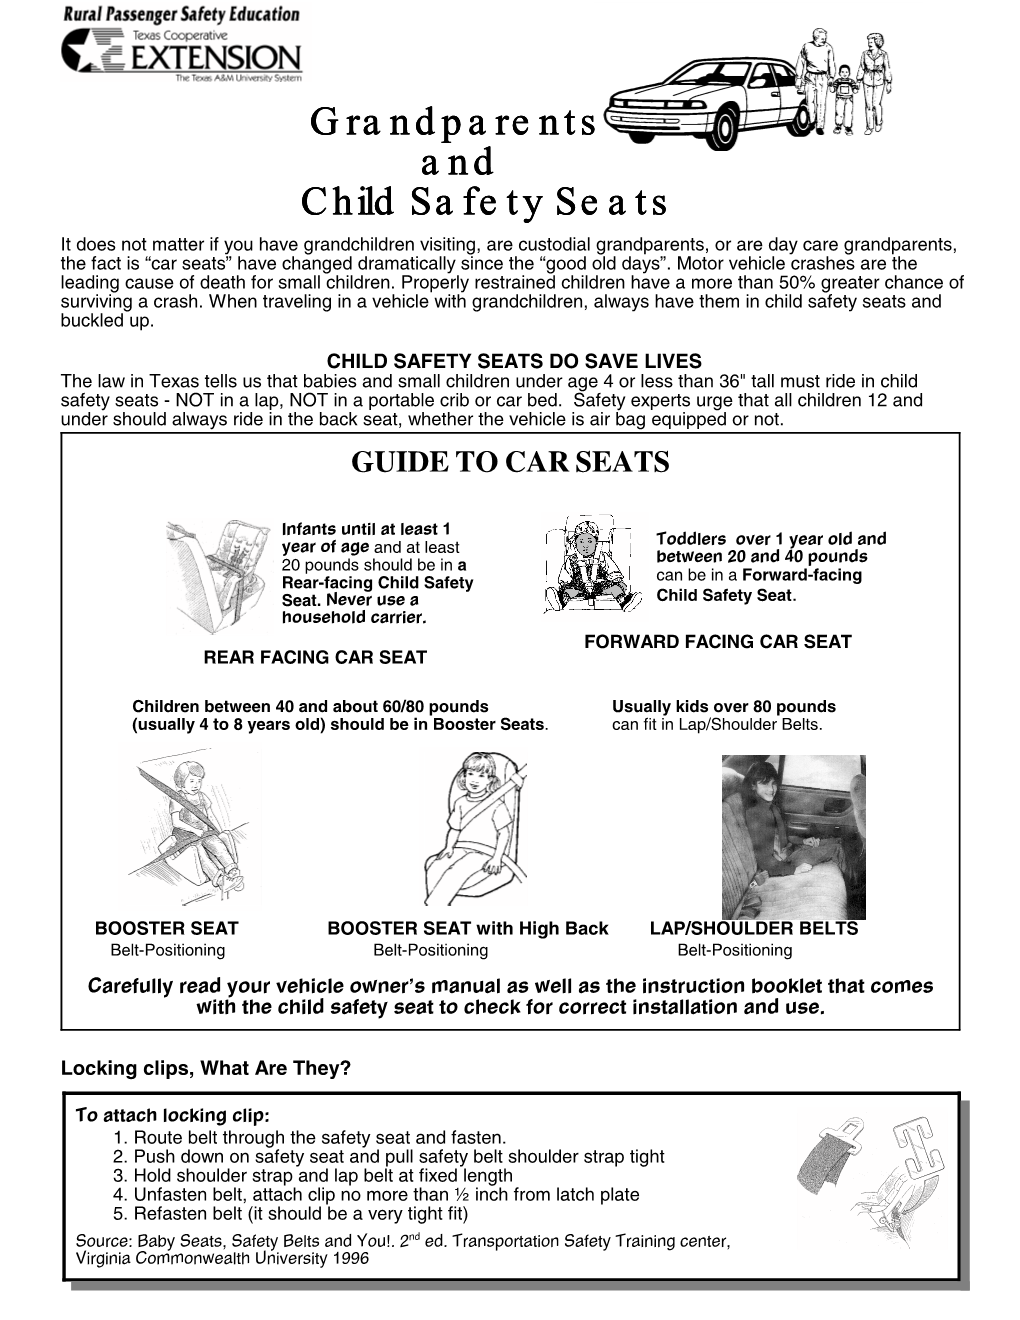 Grandparents and Child Safety Seats